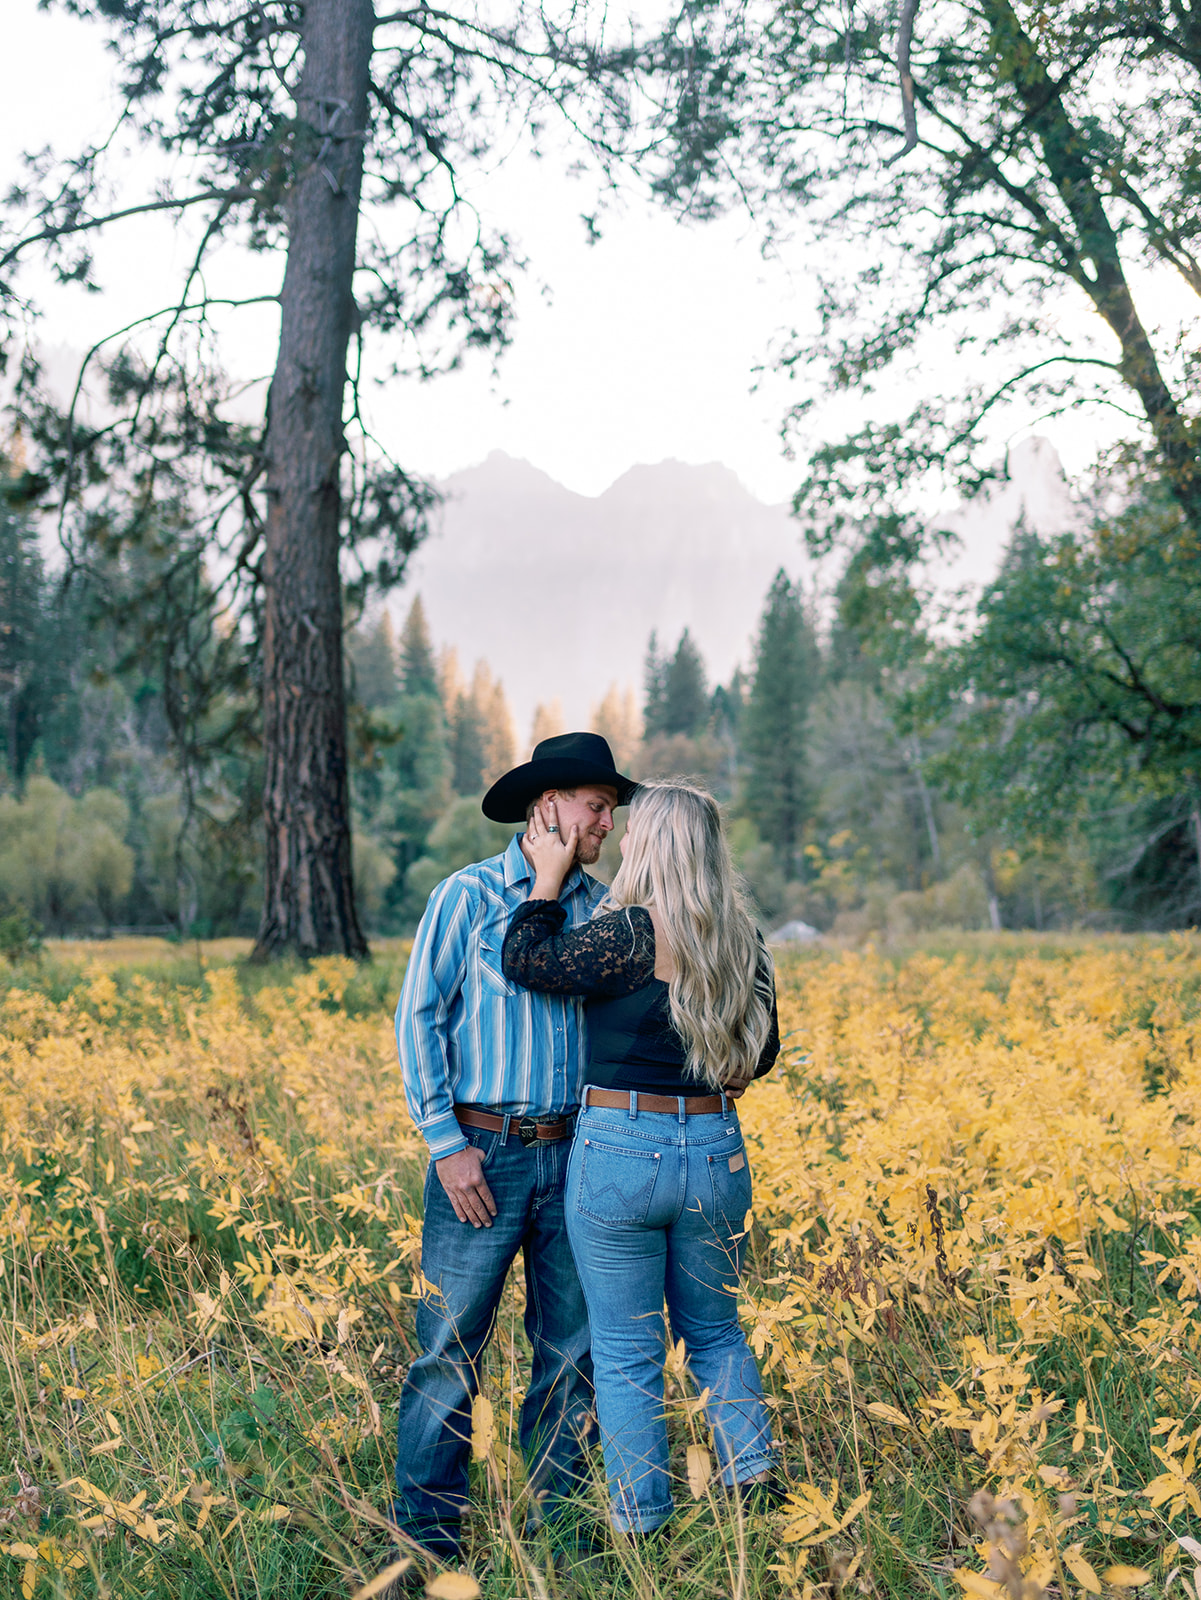 A couple share an intimate moment in jeans in a field of yellow wildflowers at a Yosemite National Park Wedding